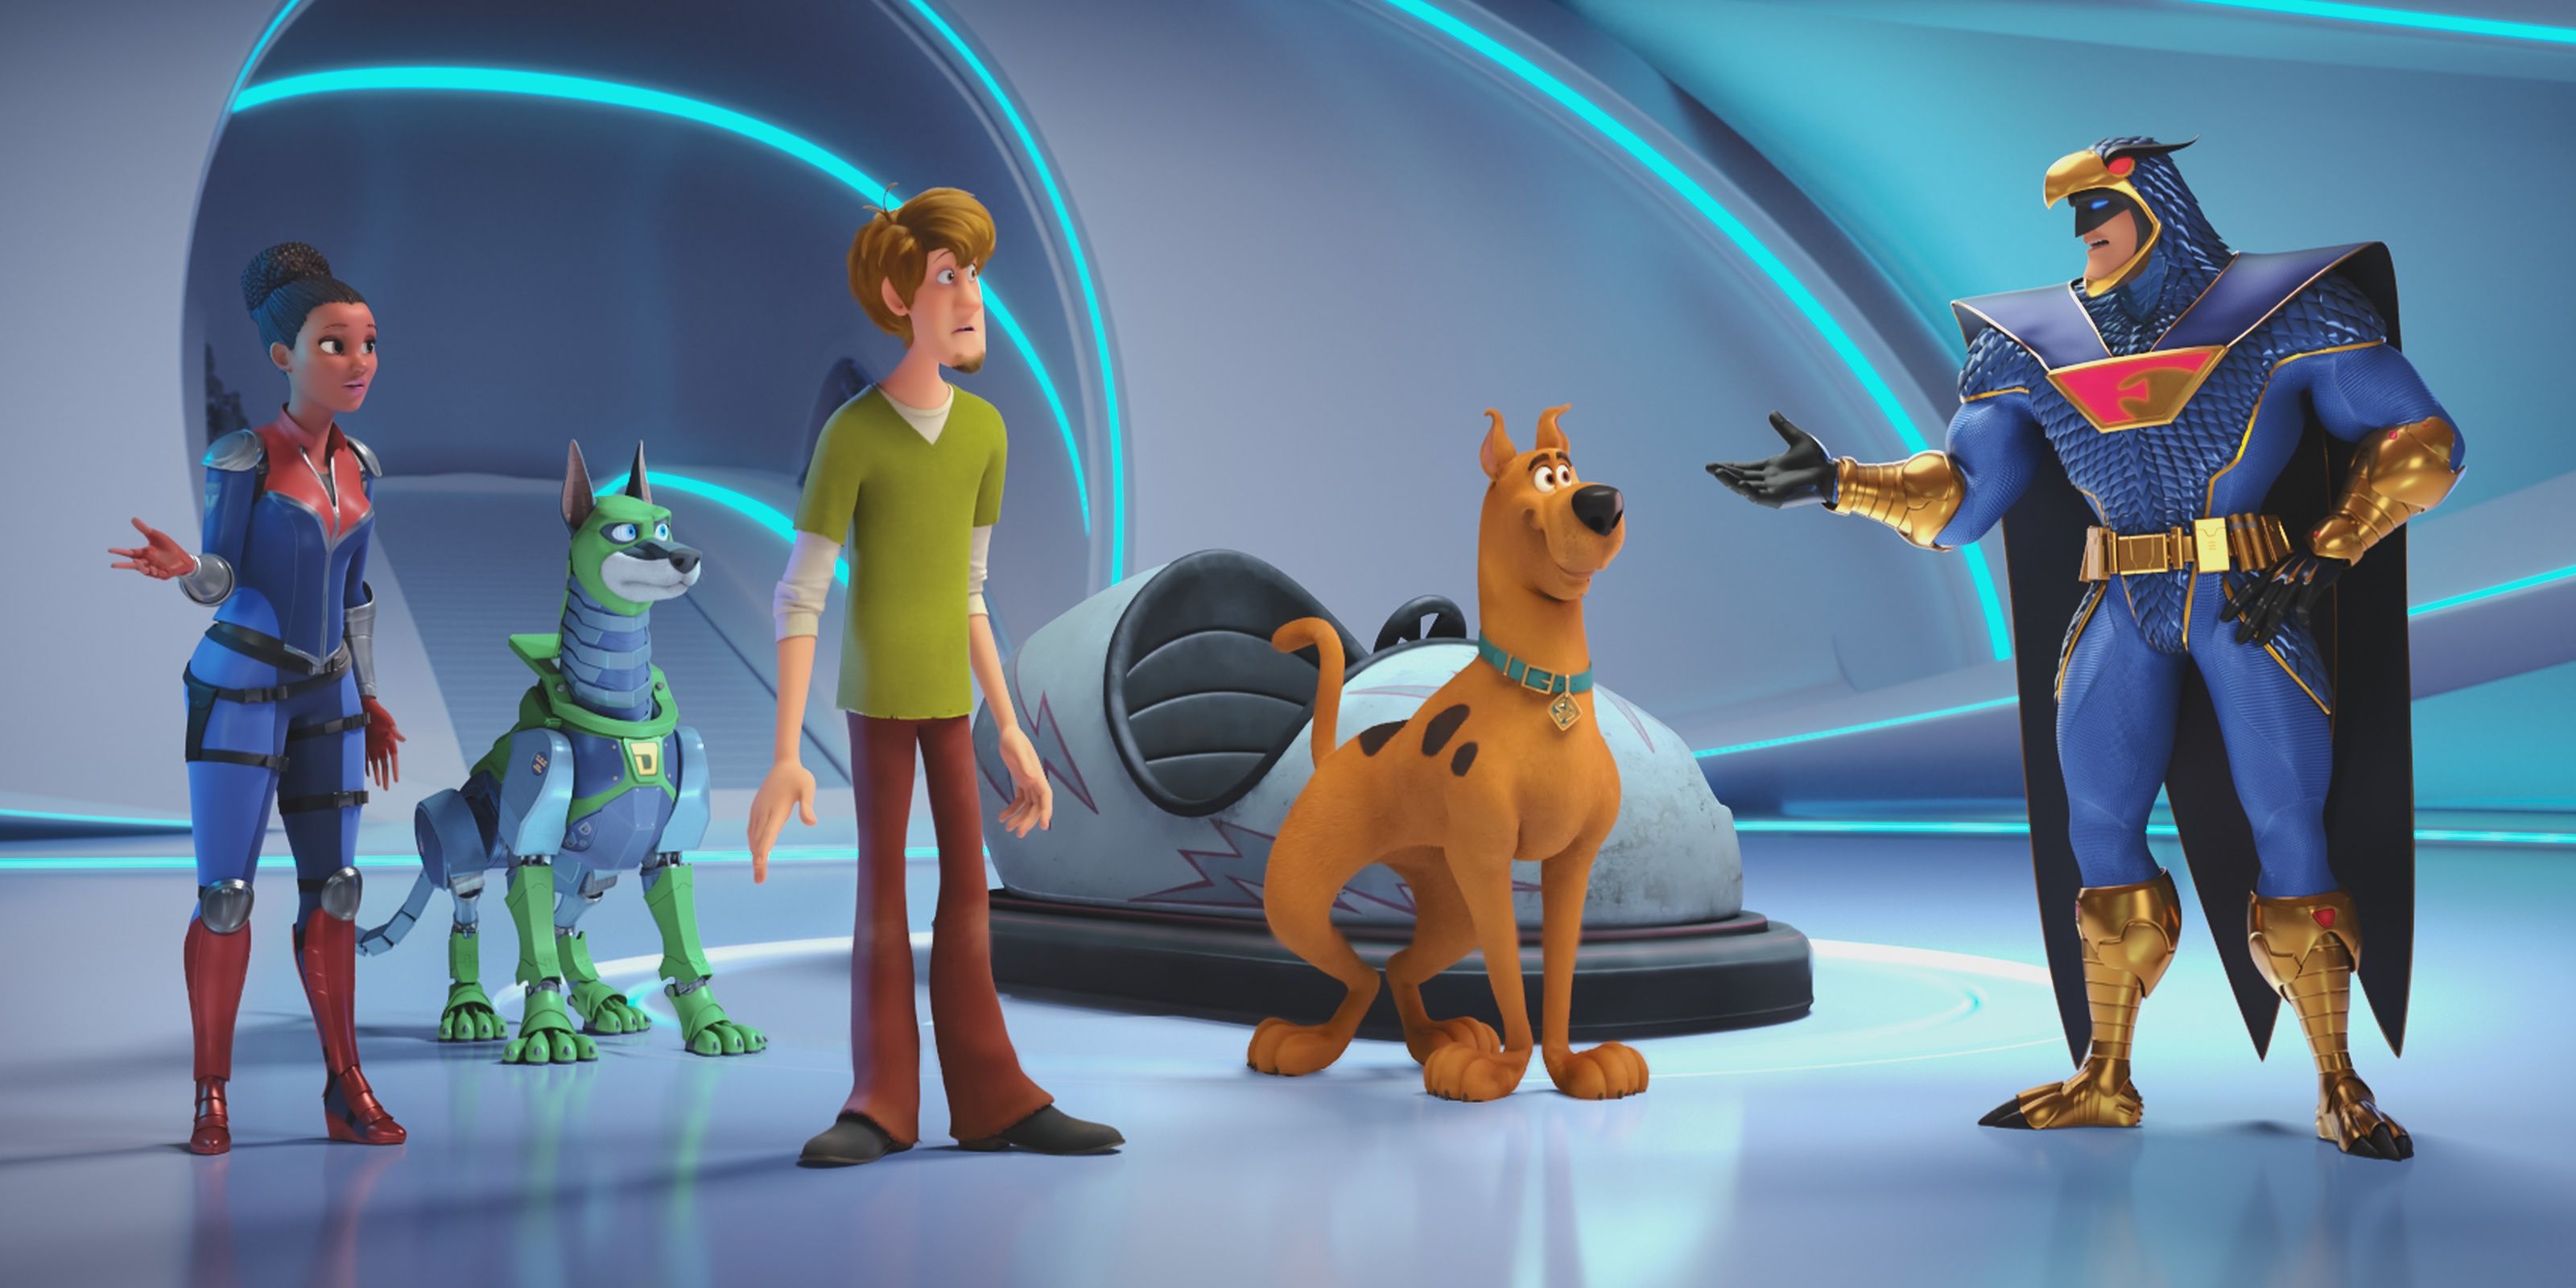 Scooby-Doo, Shaggy, Blue Falcon, and Dynomutt in Scoob!